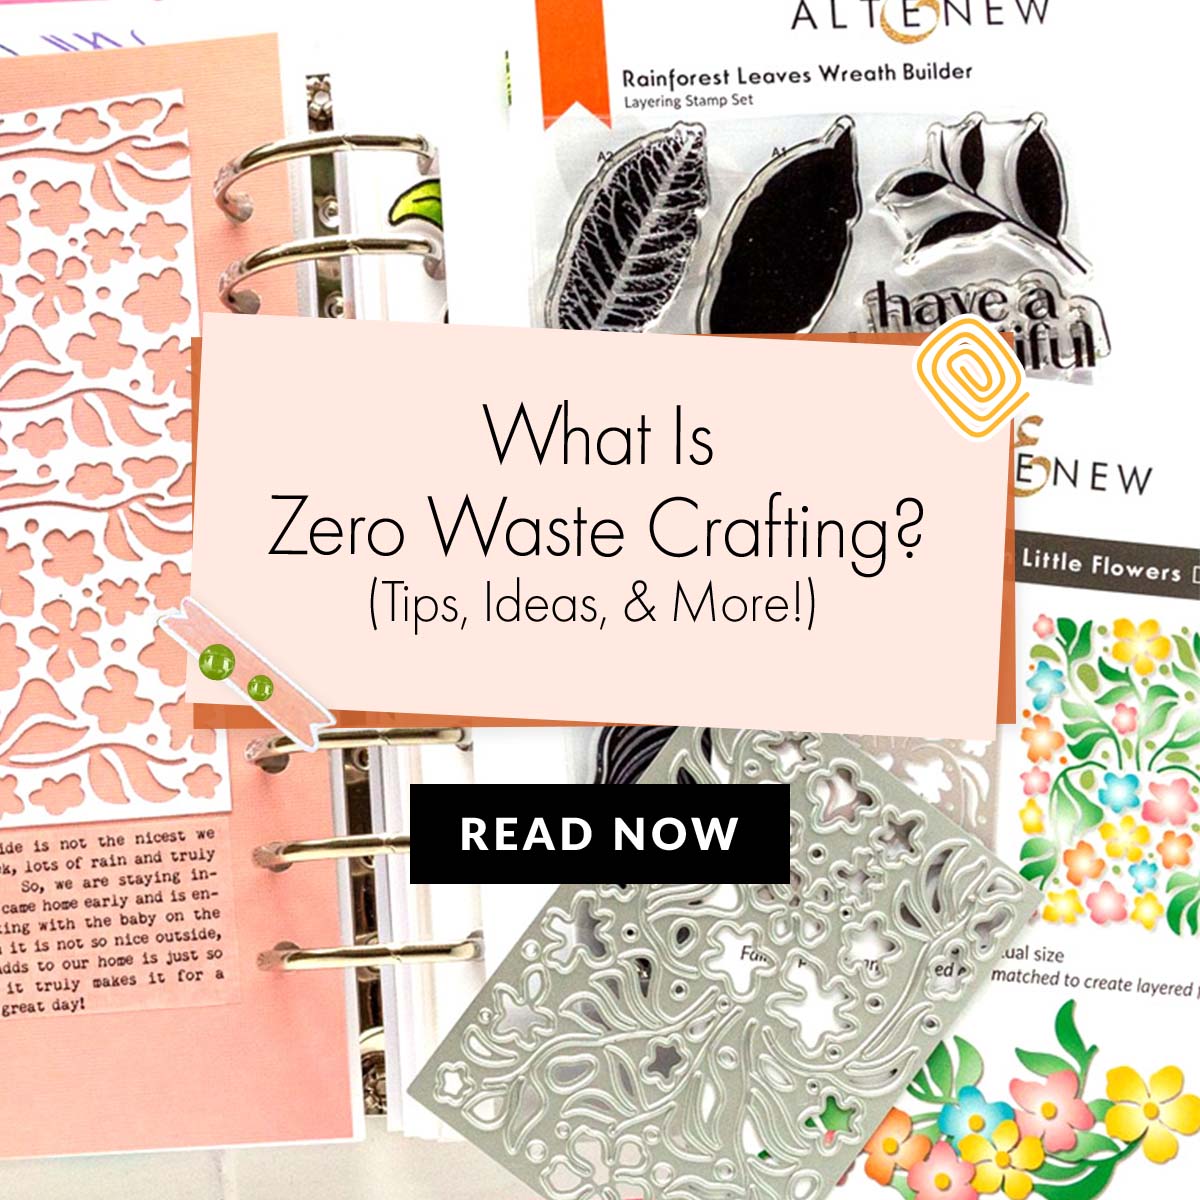 Everything You Need to Know About Zero Waste Crafting